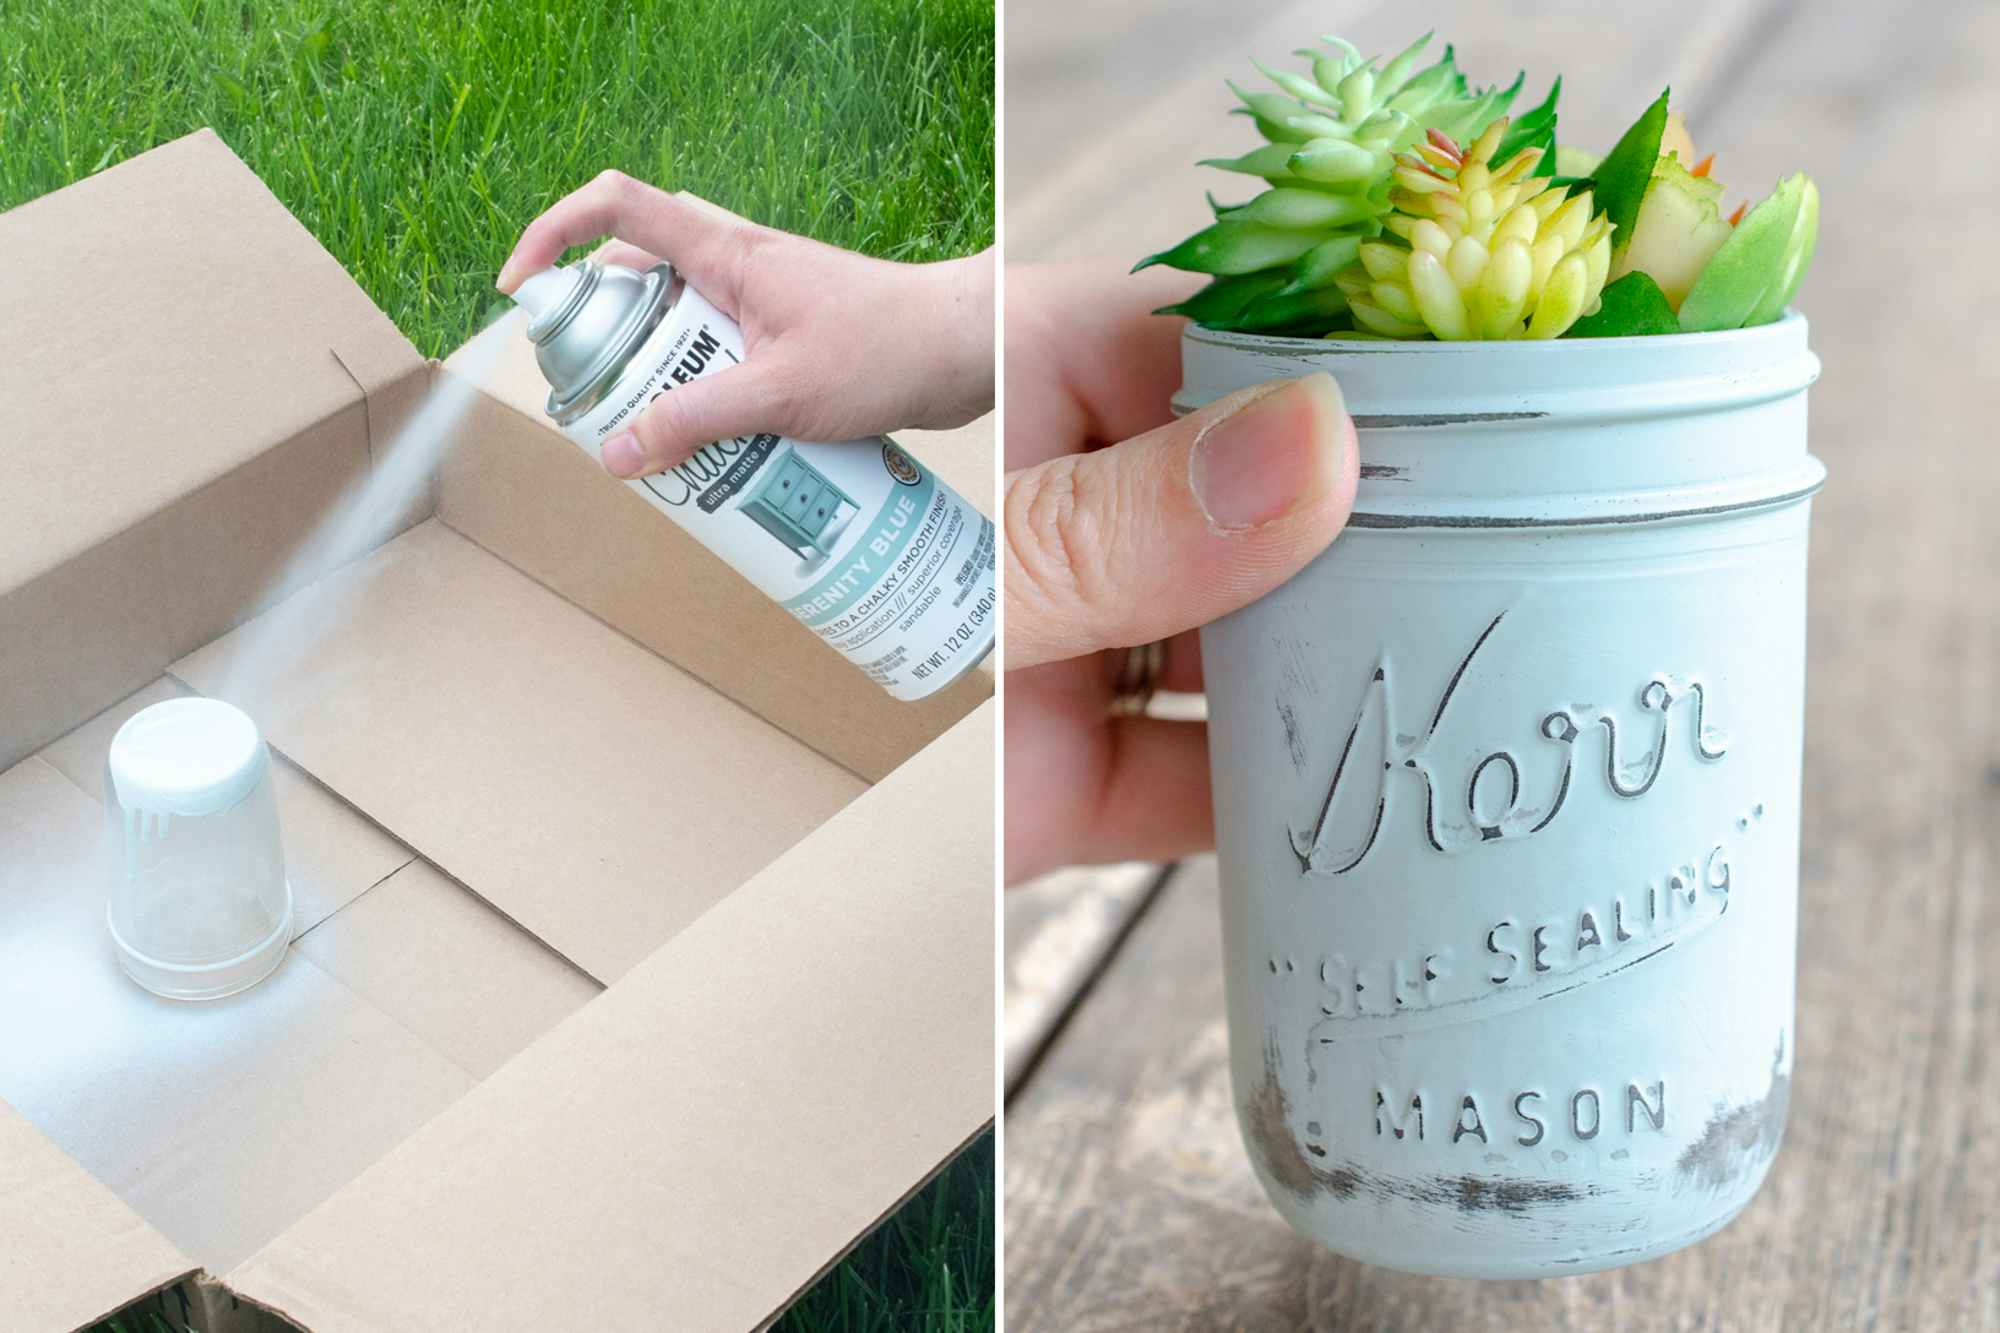 Two images side by side; one a person spray painting an upside down mason jar in a box and the second image is a person holding a ...